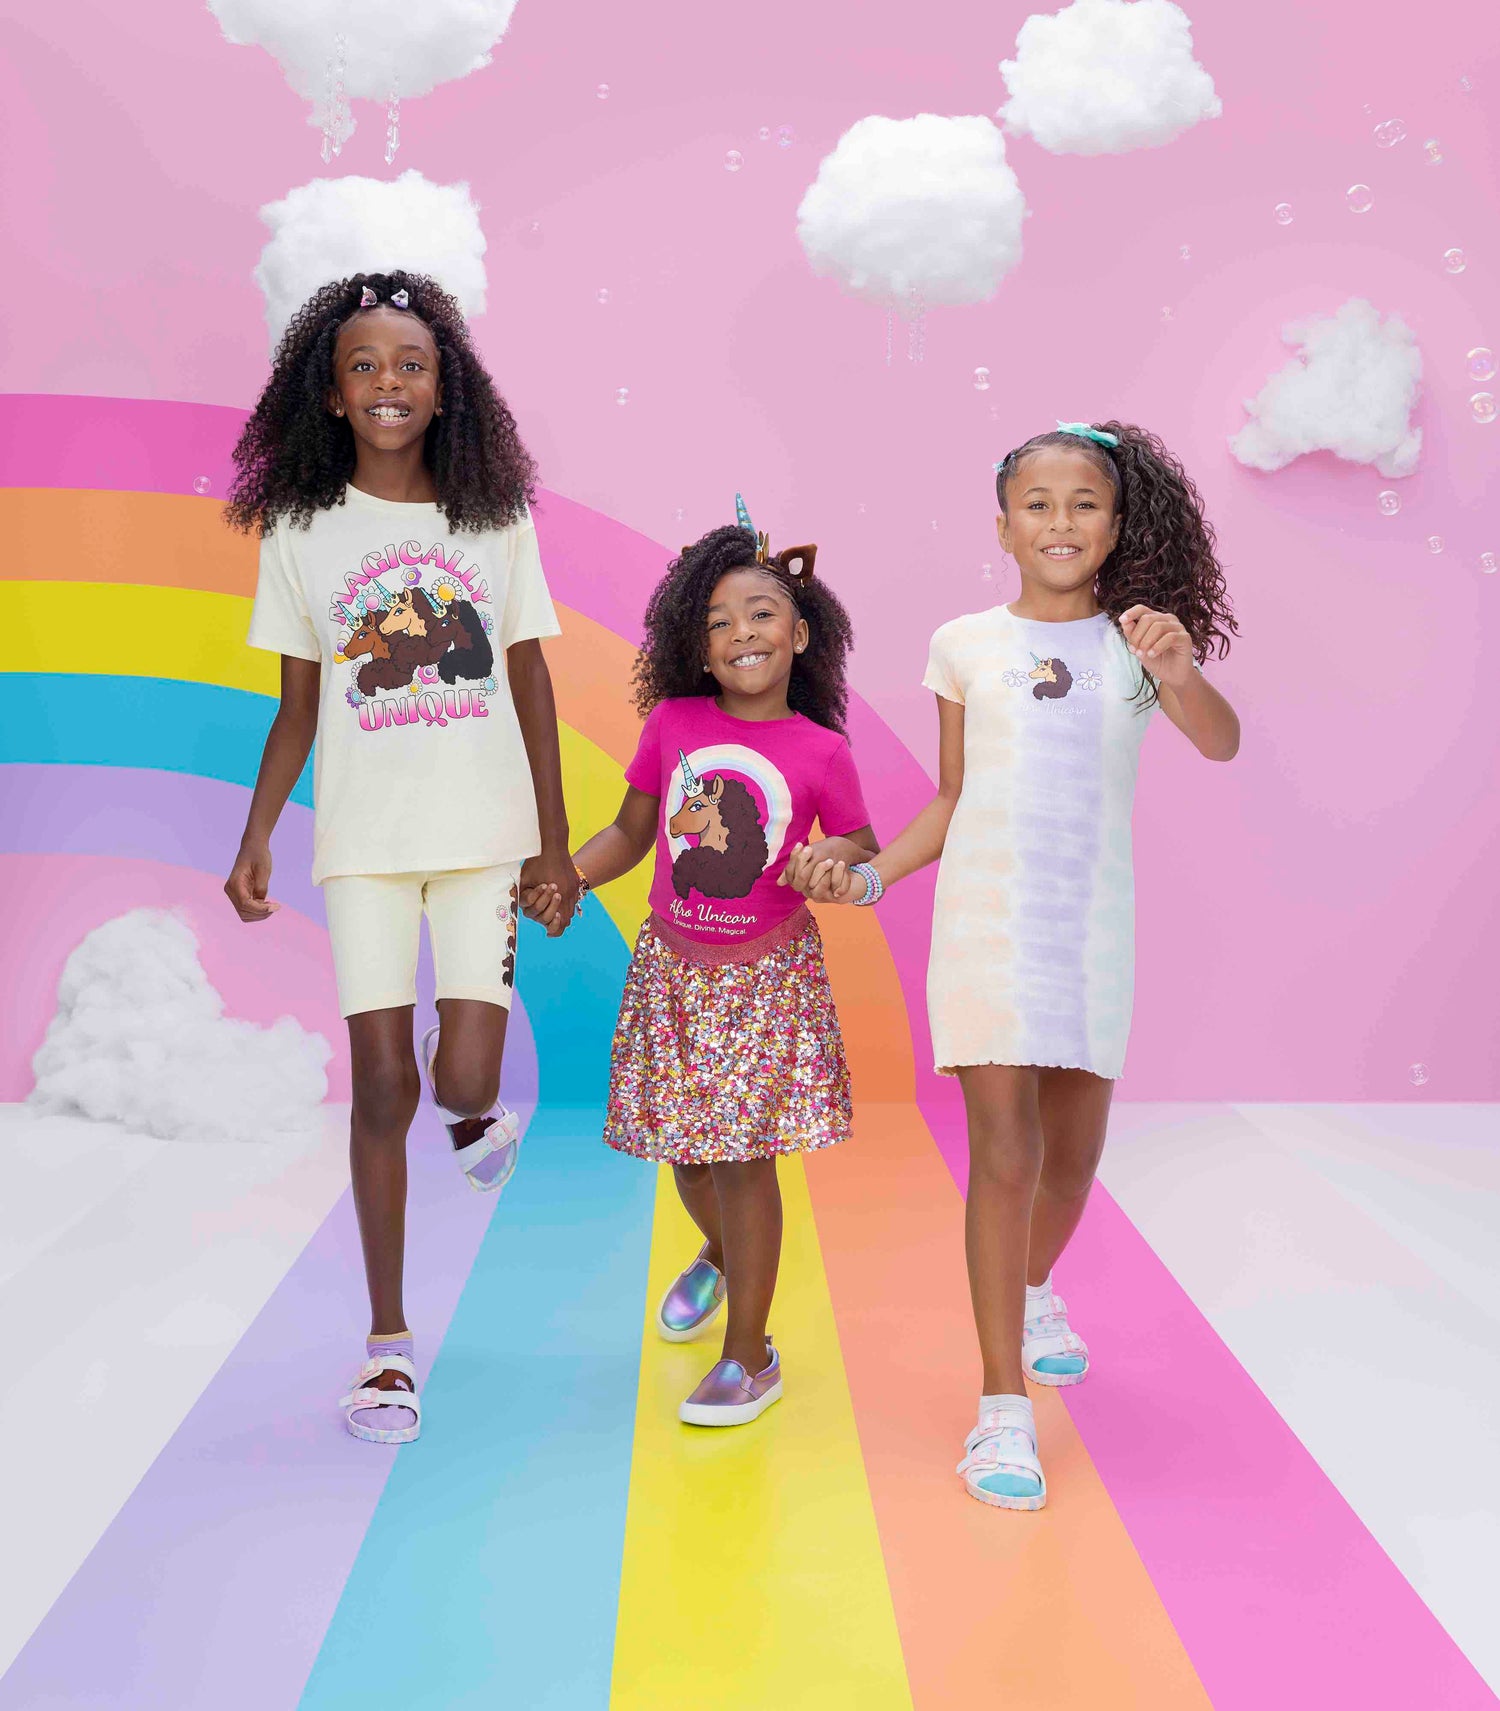 Three Afro Unicorn models holding hands in front of a rainbow walkway.